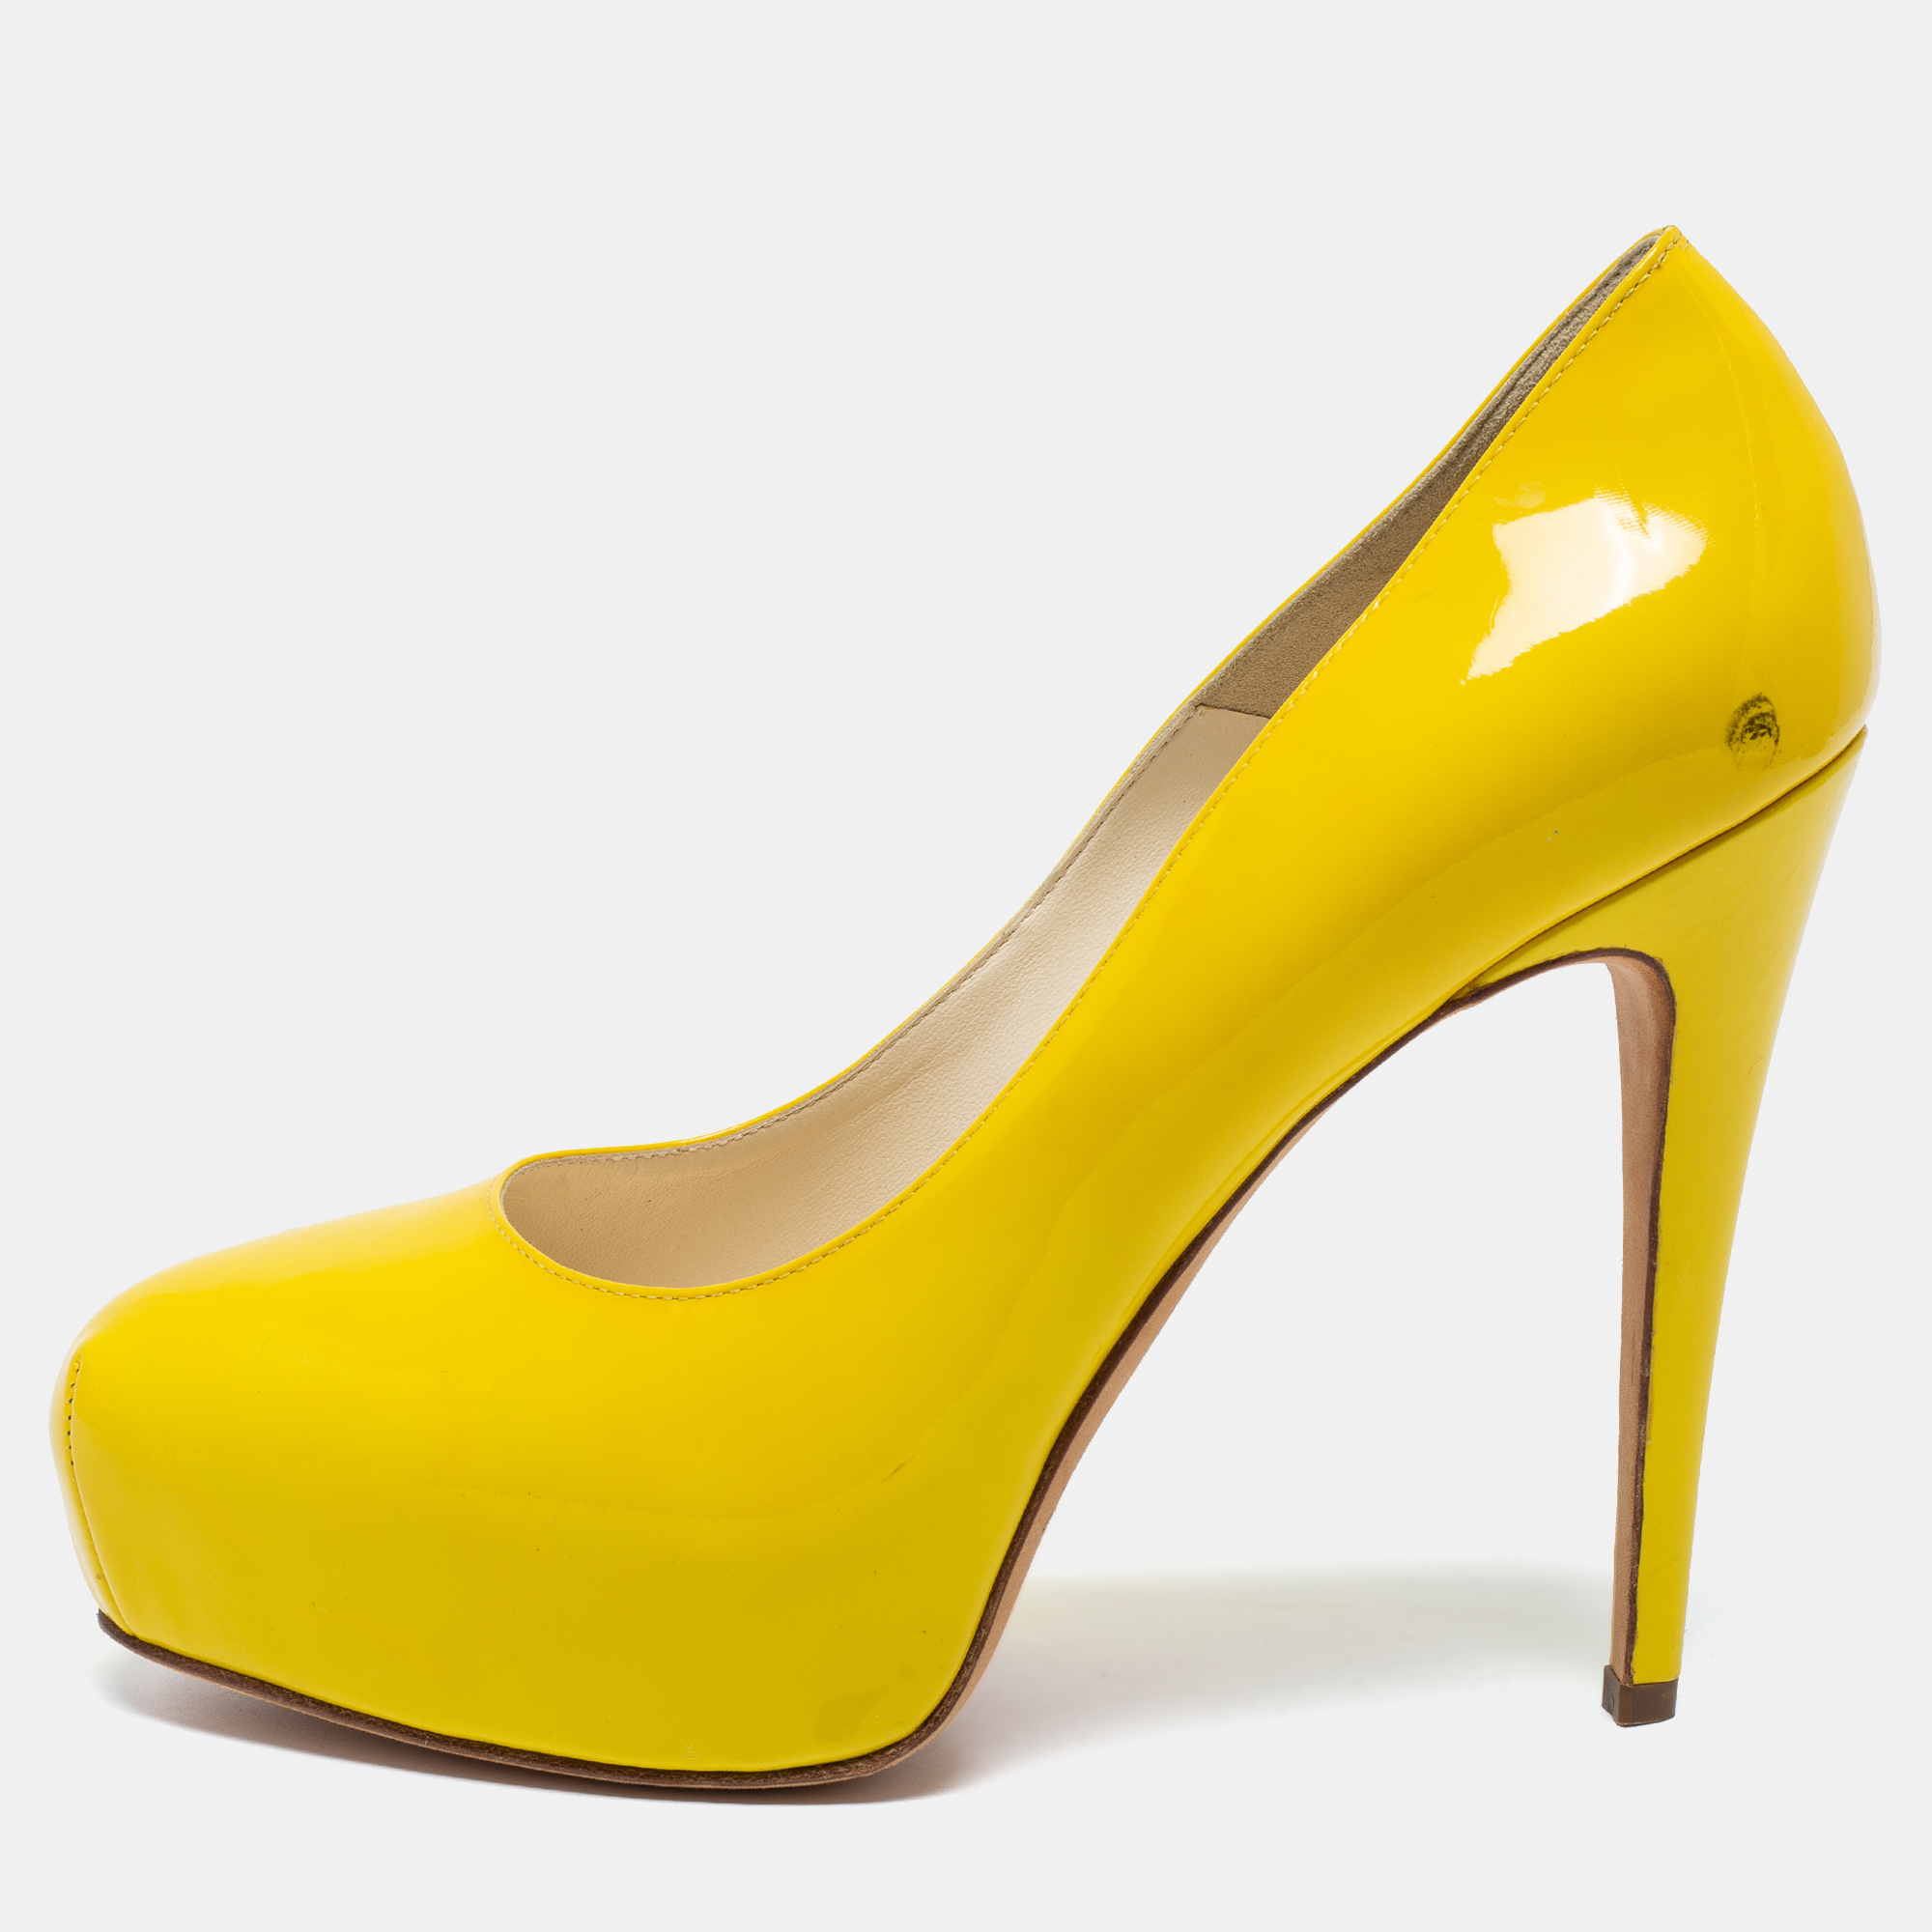 Pre-owned Brian Atwood Yellow Patent Leather Platform Pumps Size 39